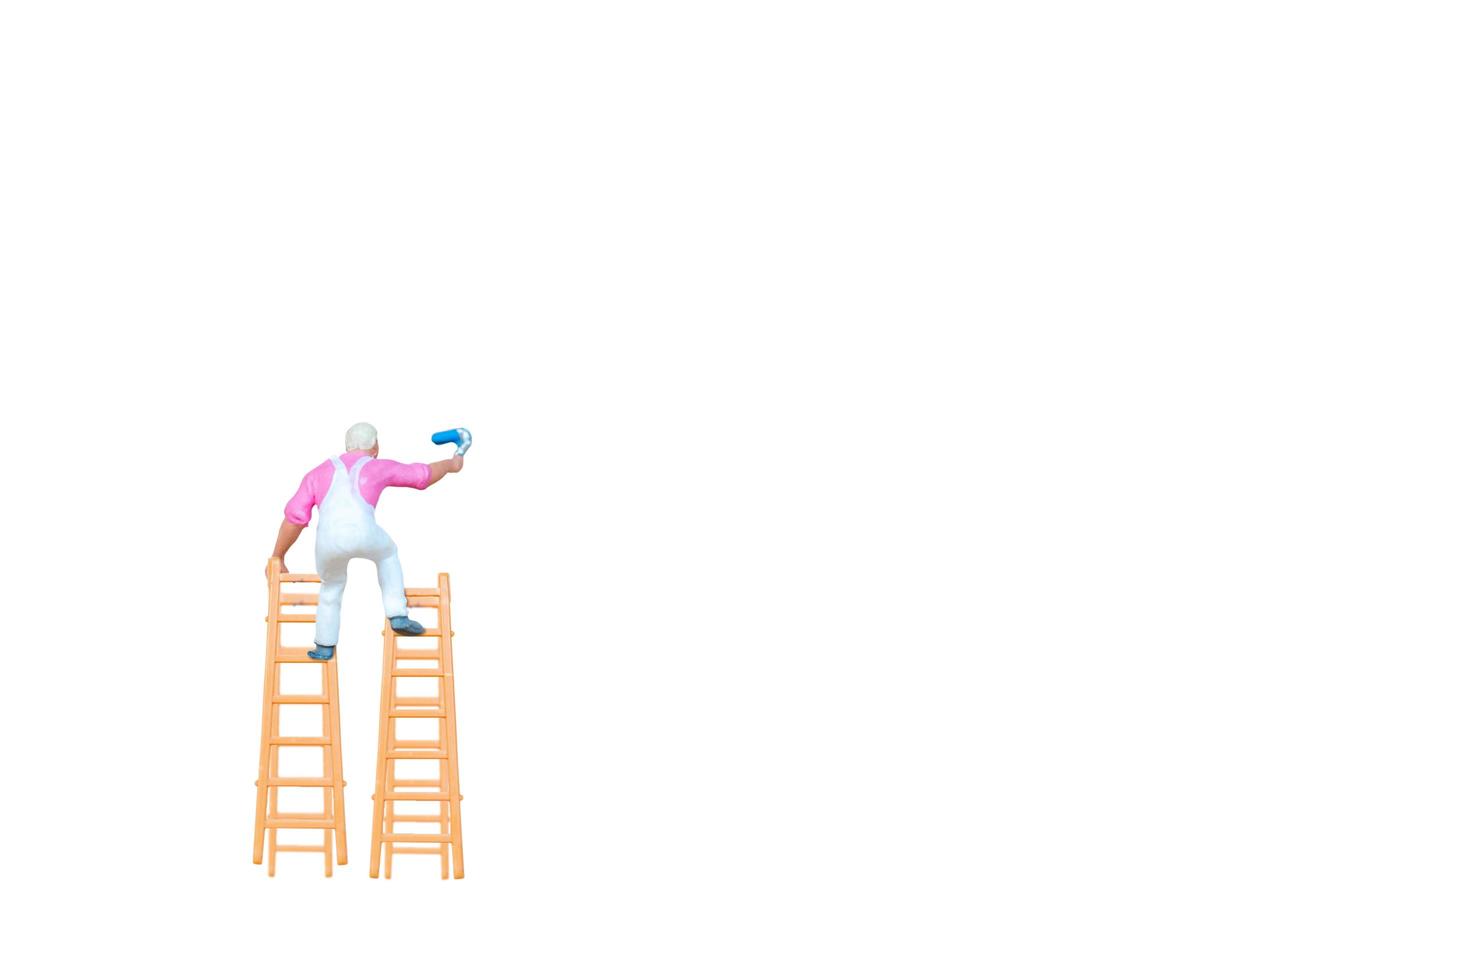 Miniature person with a ladder holding a brush in front of a white wall background photo